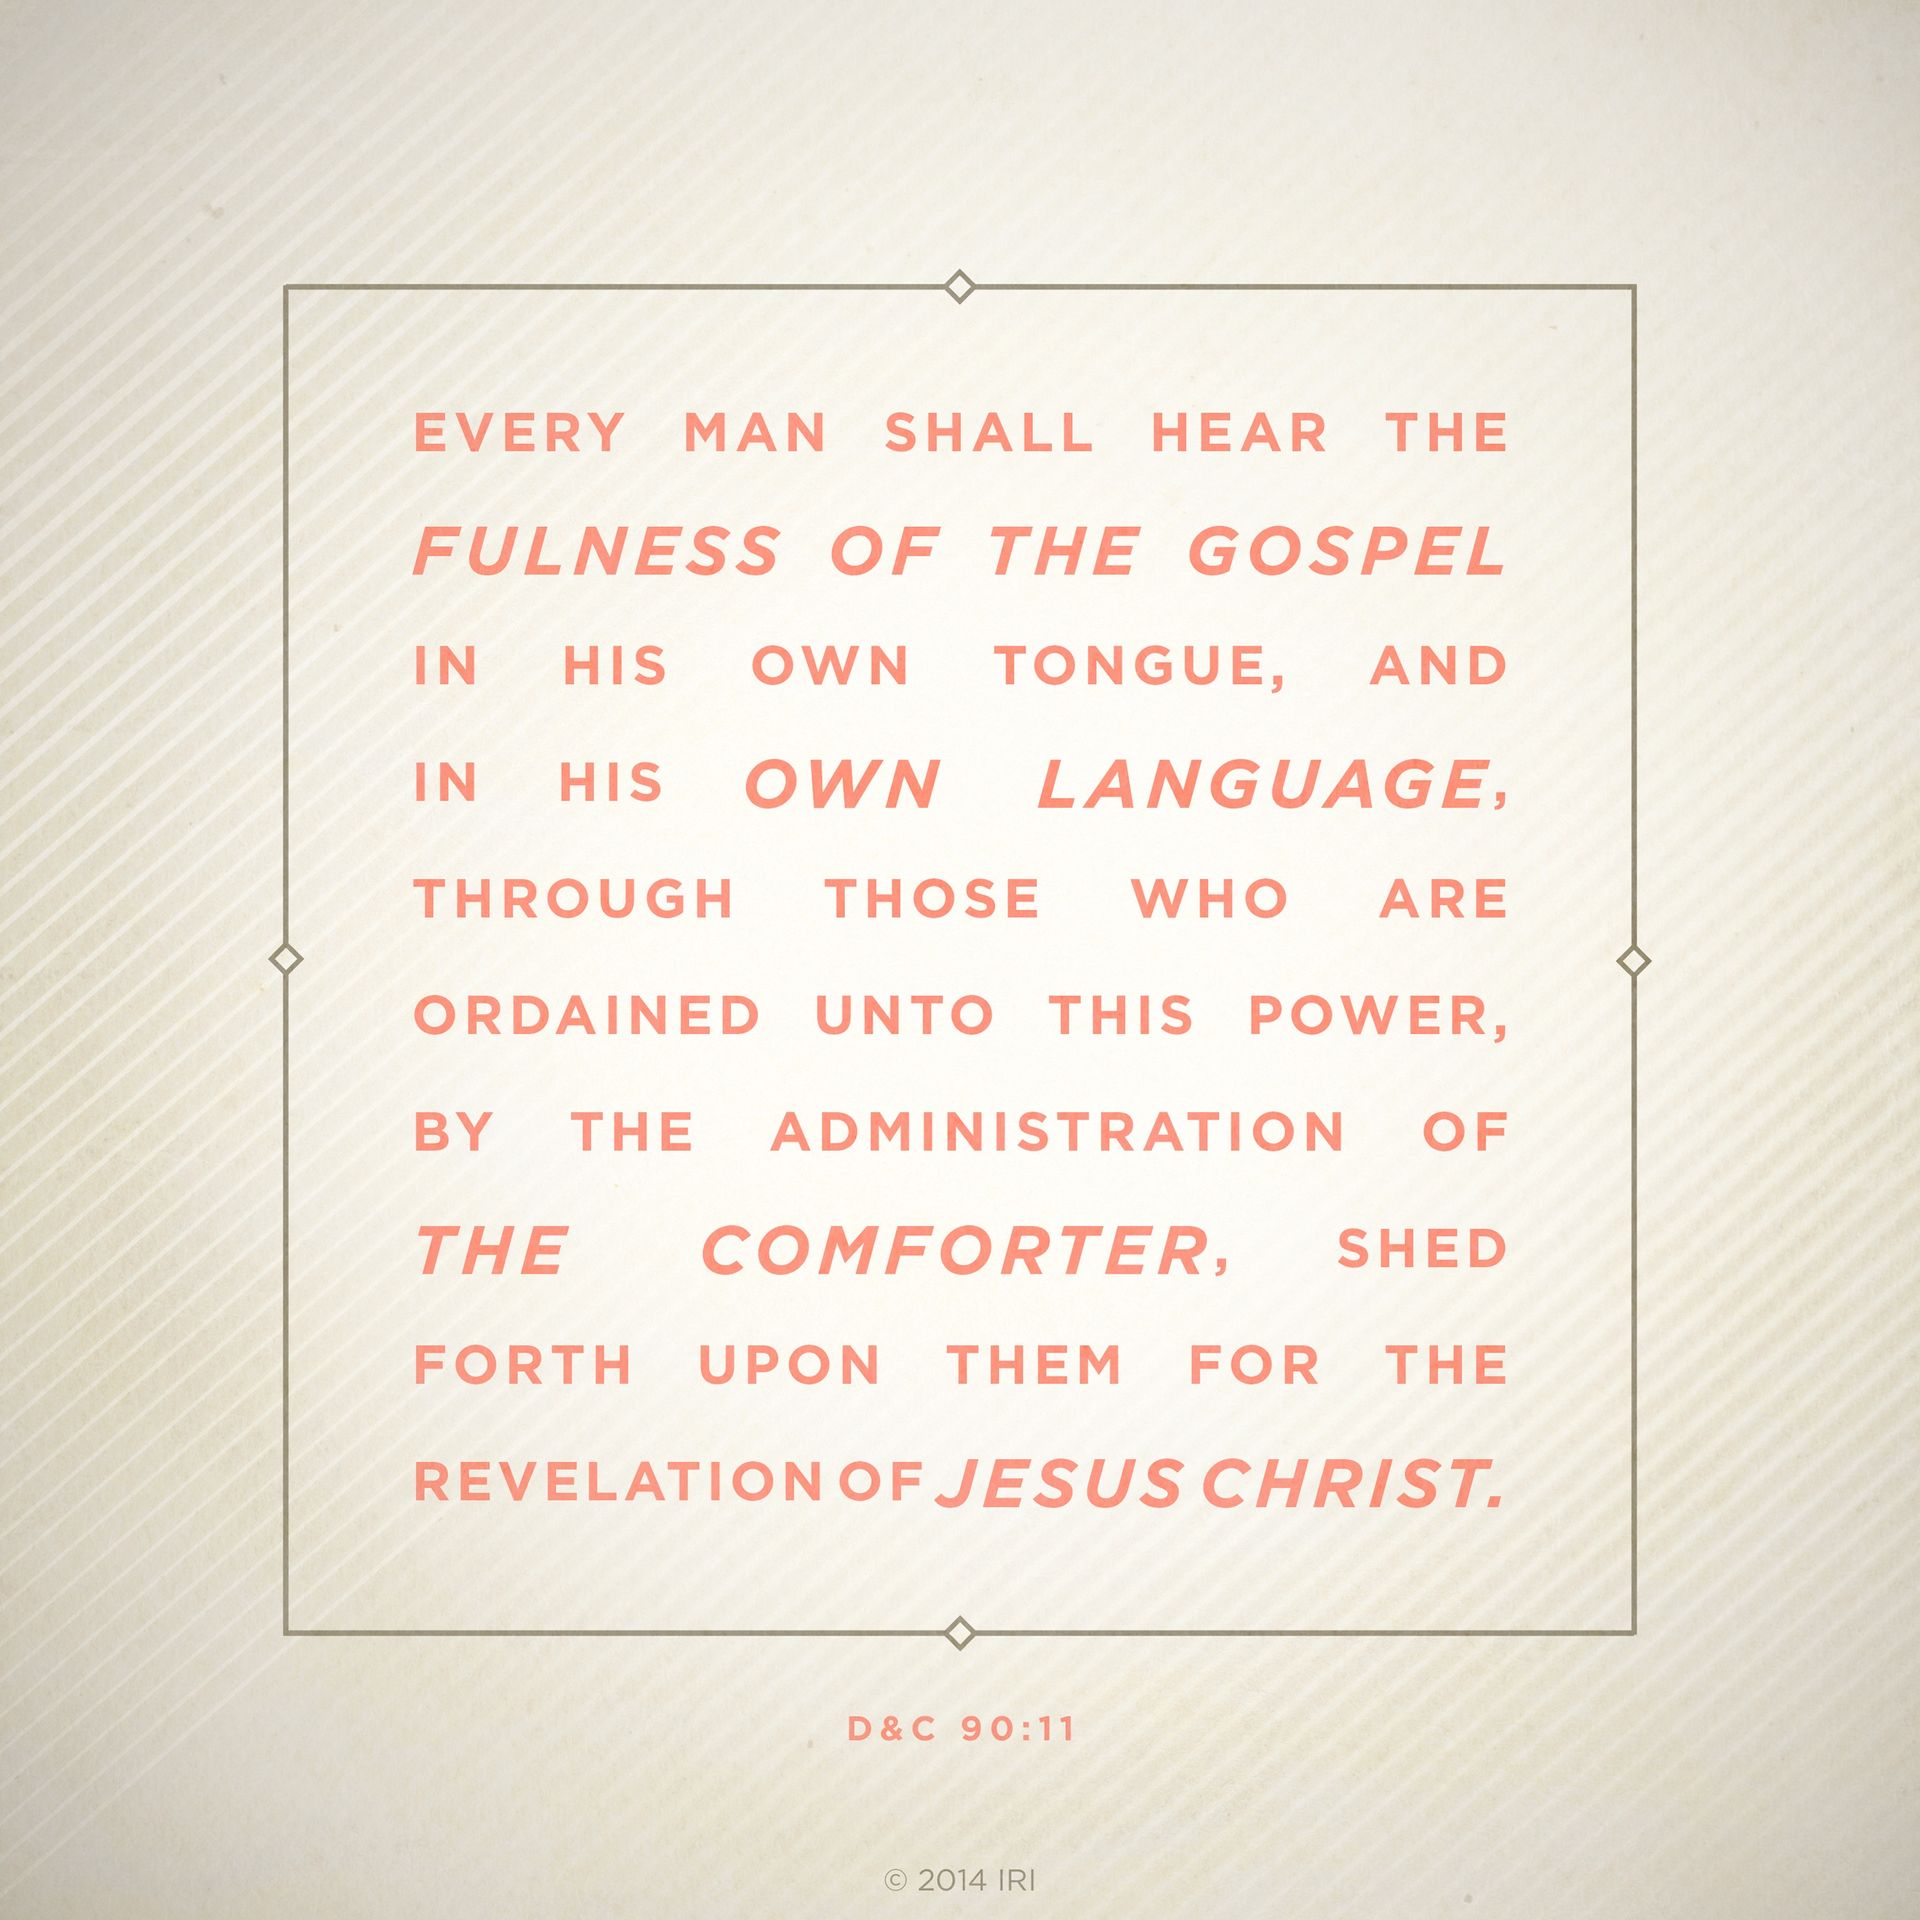 “Every man shall hear the fulness of the gospel in his own tongue, and in his own language, through those who are ordained unto this power, by the administration of the Comforter, shed forth upon them for the revelation of Jesus Christ.”—D&C 90:11